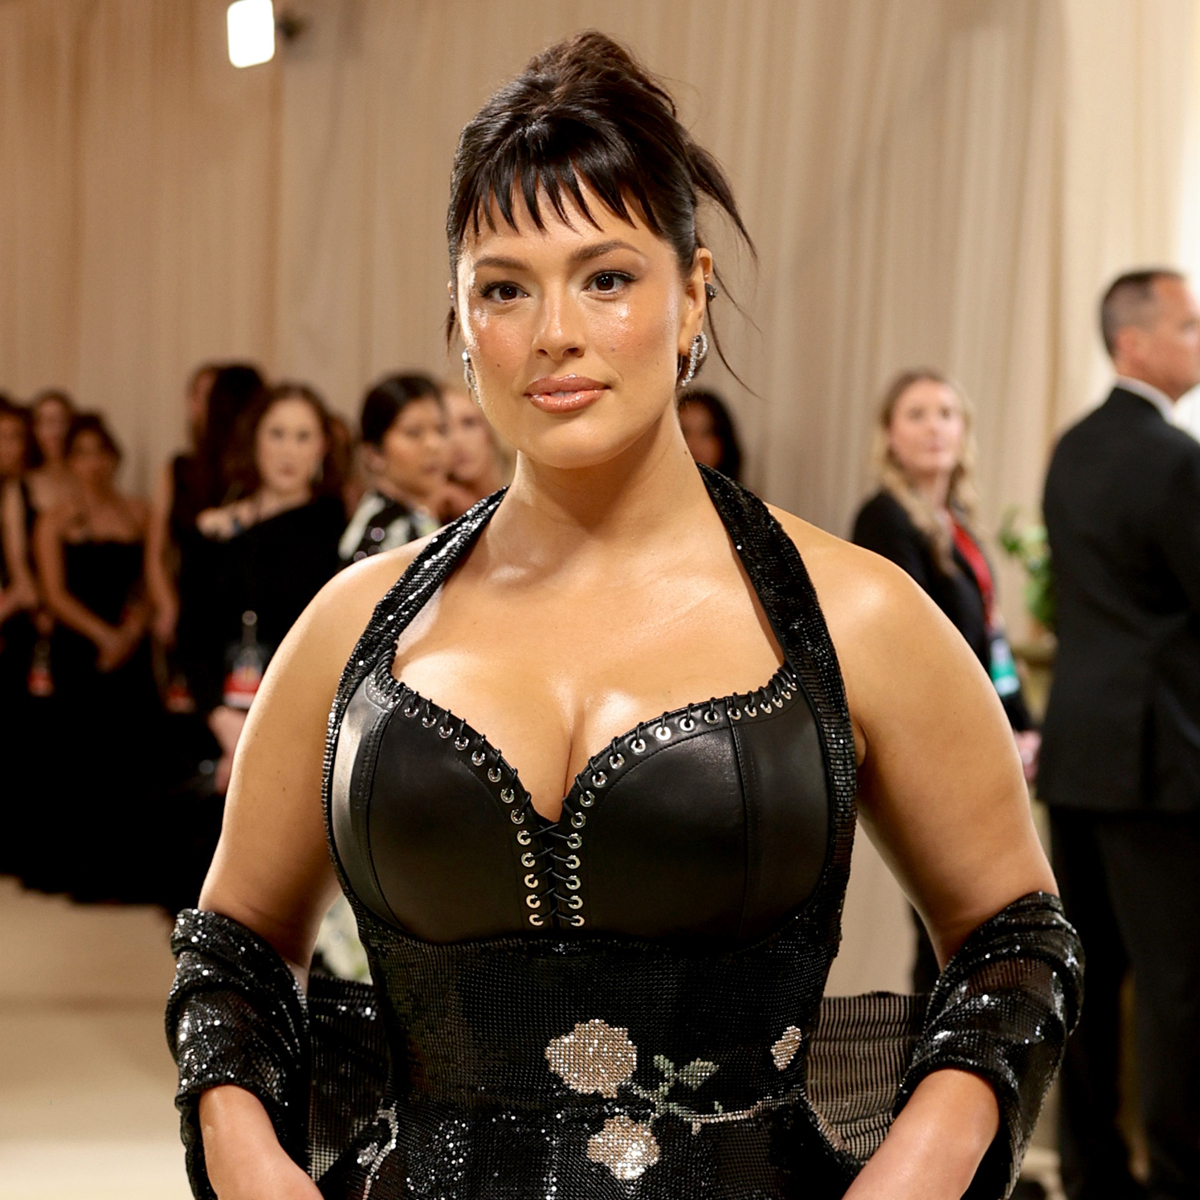 It took 500 hours to create Ashley Graham's must-have Met Gala dress